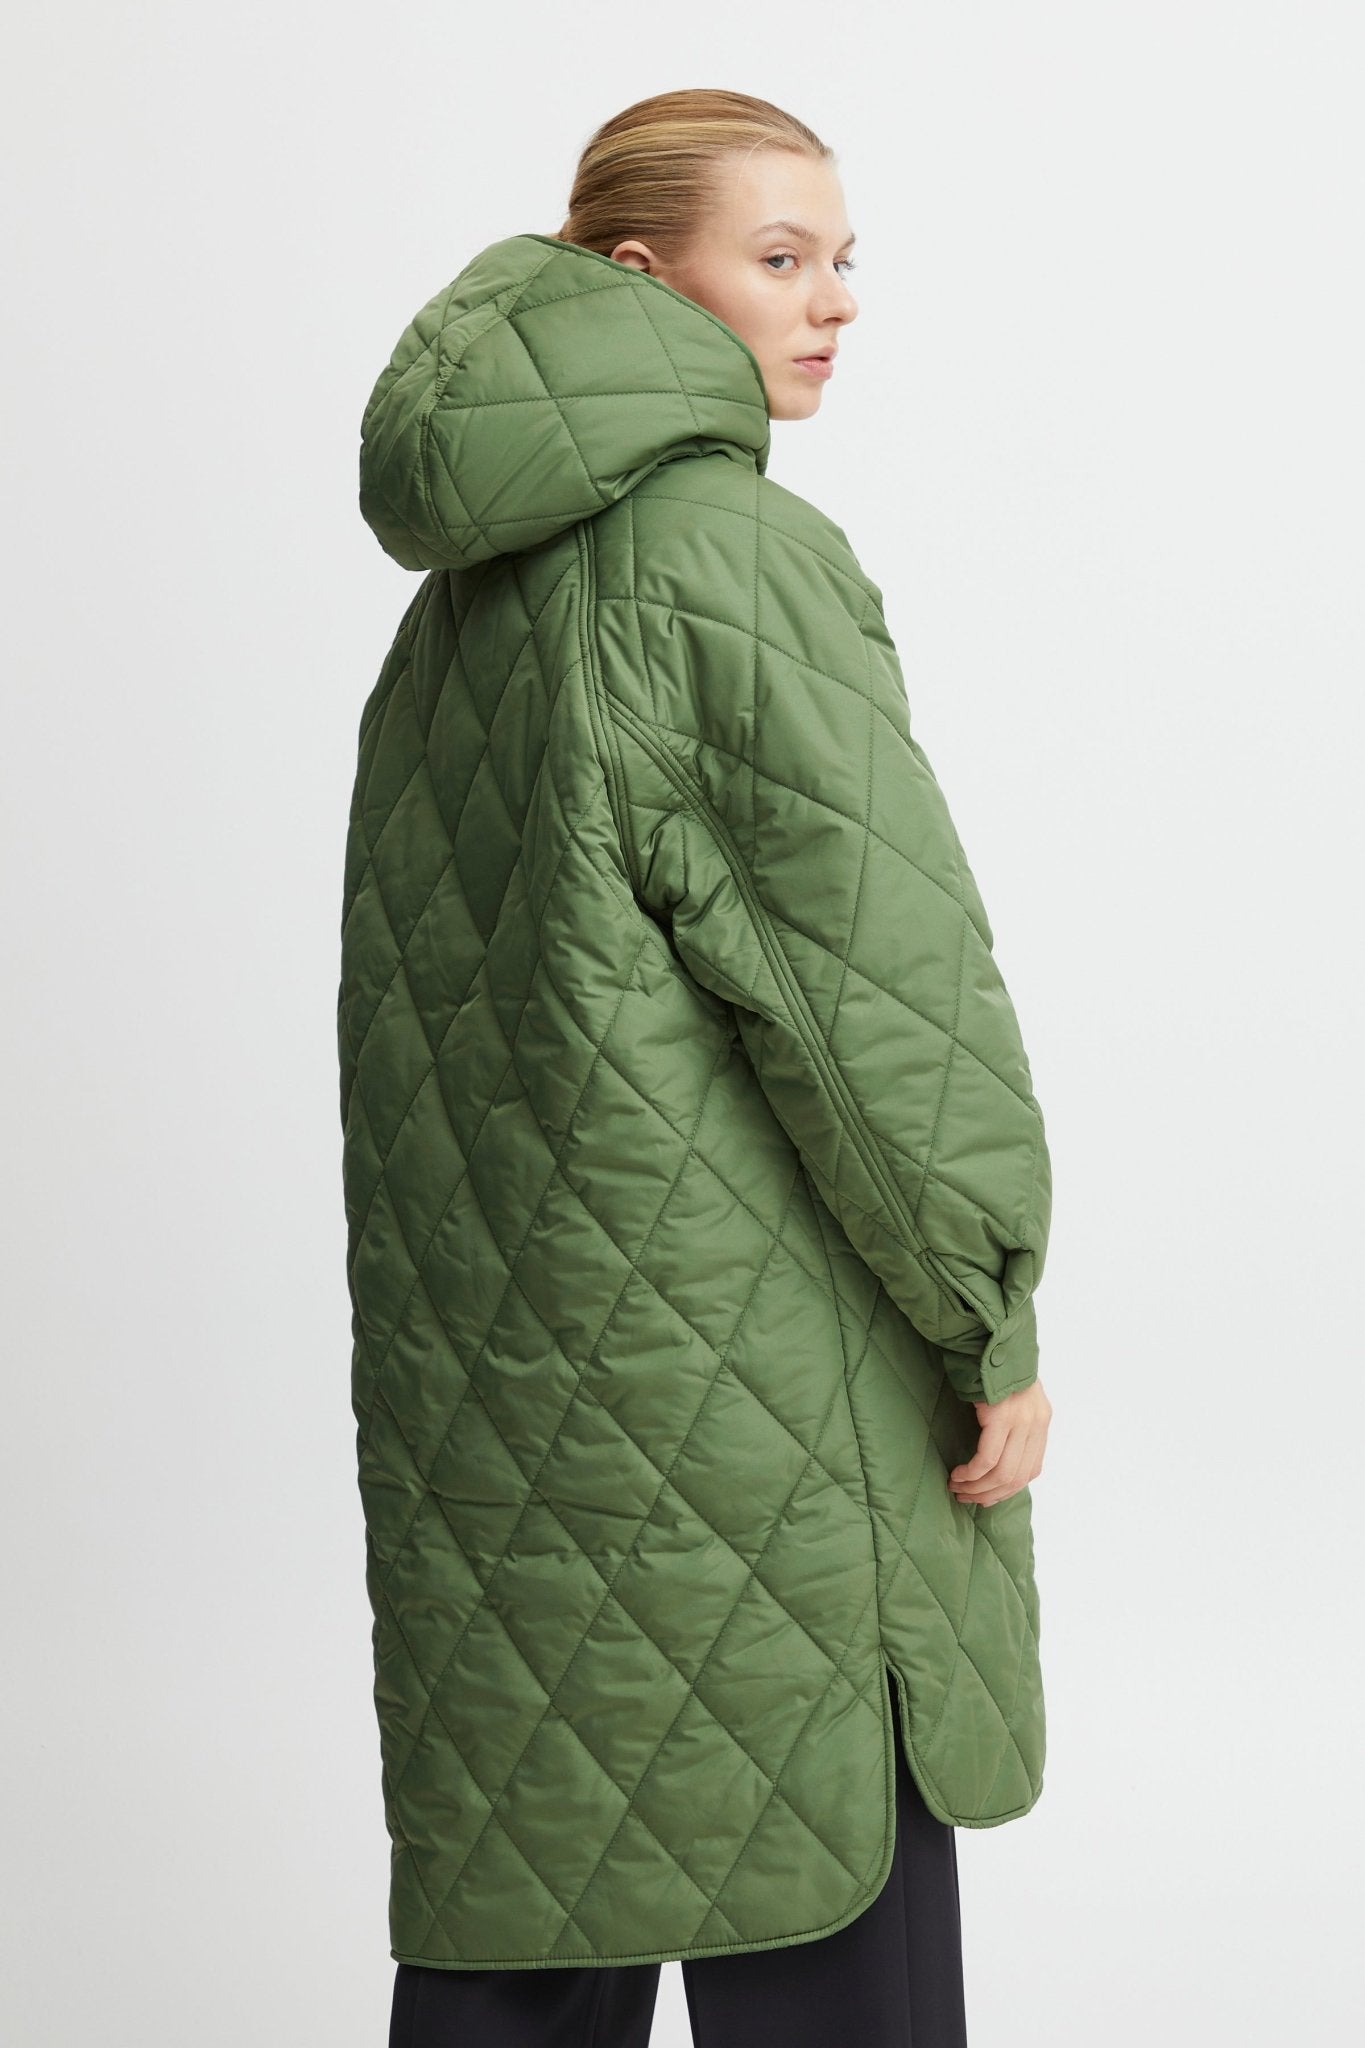 Hansa Long Quilted Jacket - Winter Mint - Blue Sky Clothing & Lingerie